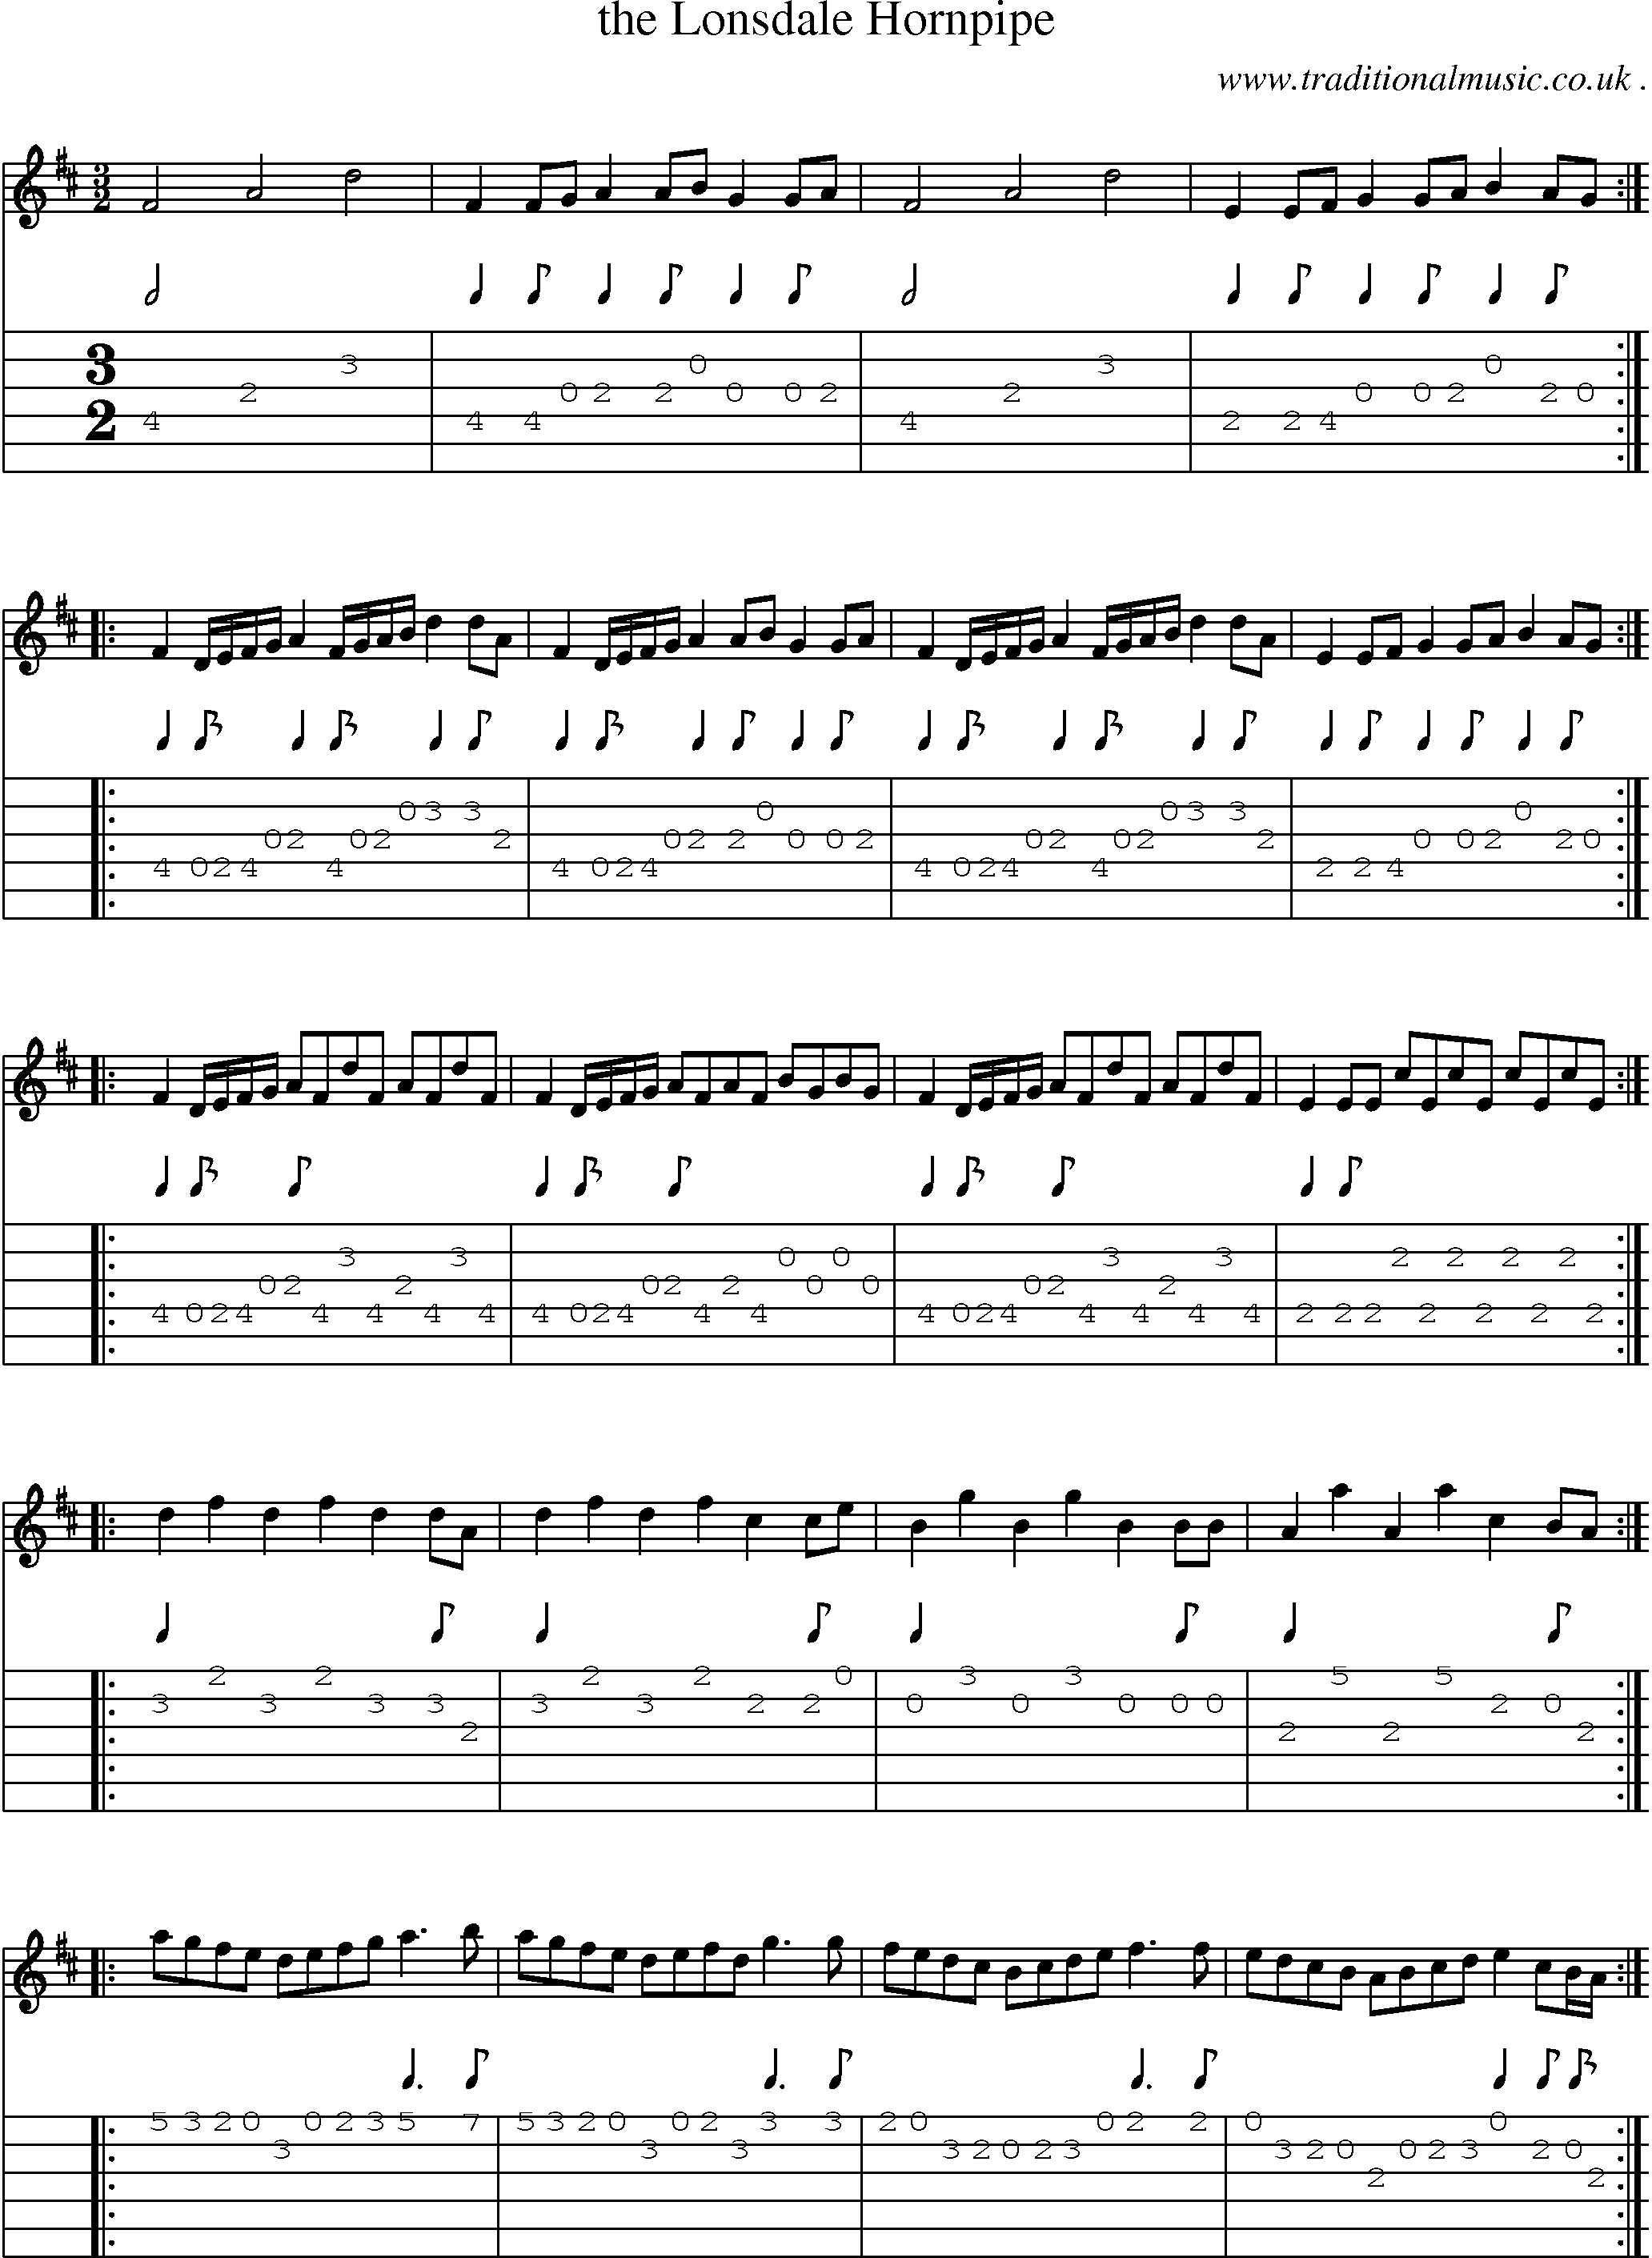 Sheet-Music and Guitar Tabs for The Lonsdale Hornpipe